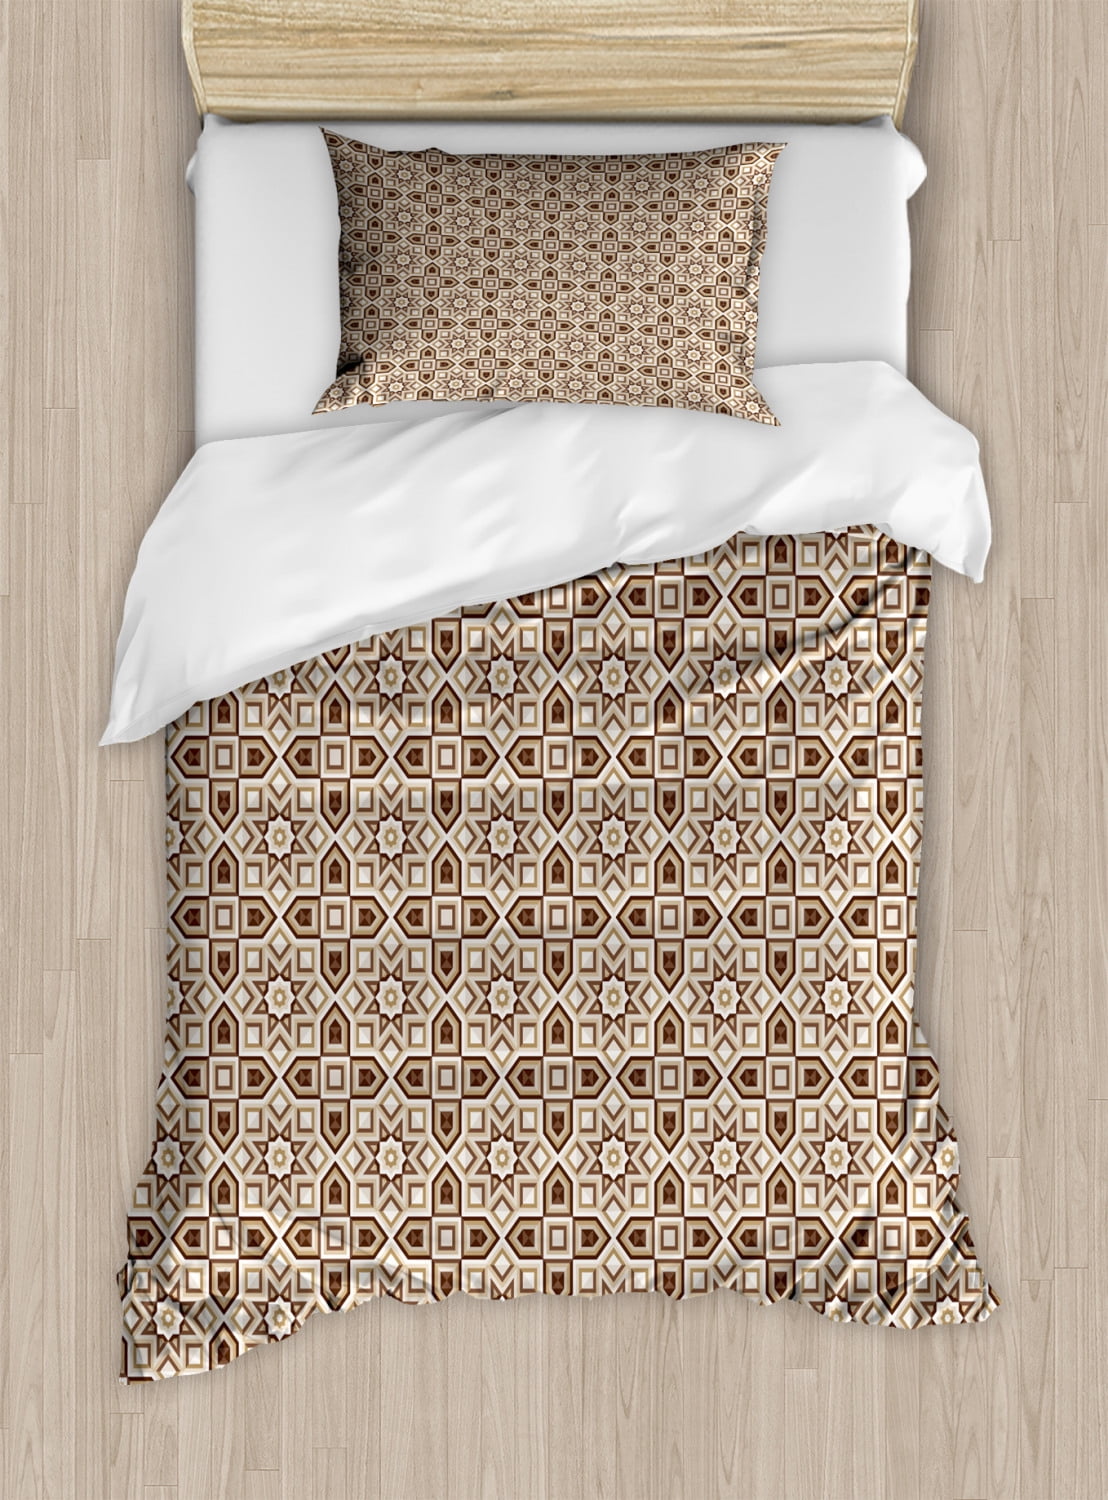 Brown Twin Size Duvet Cover Set Tile Pattern With Squares